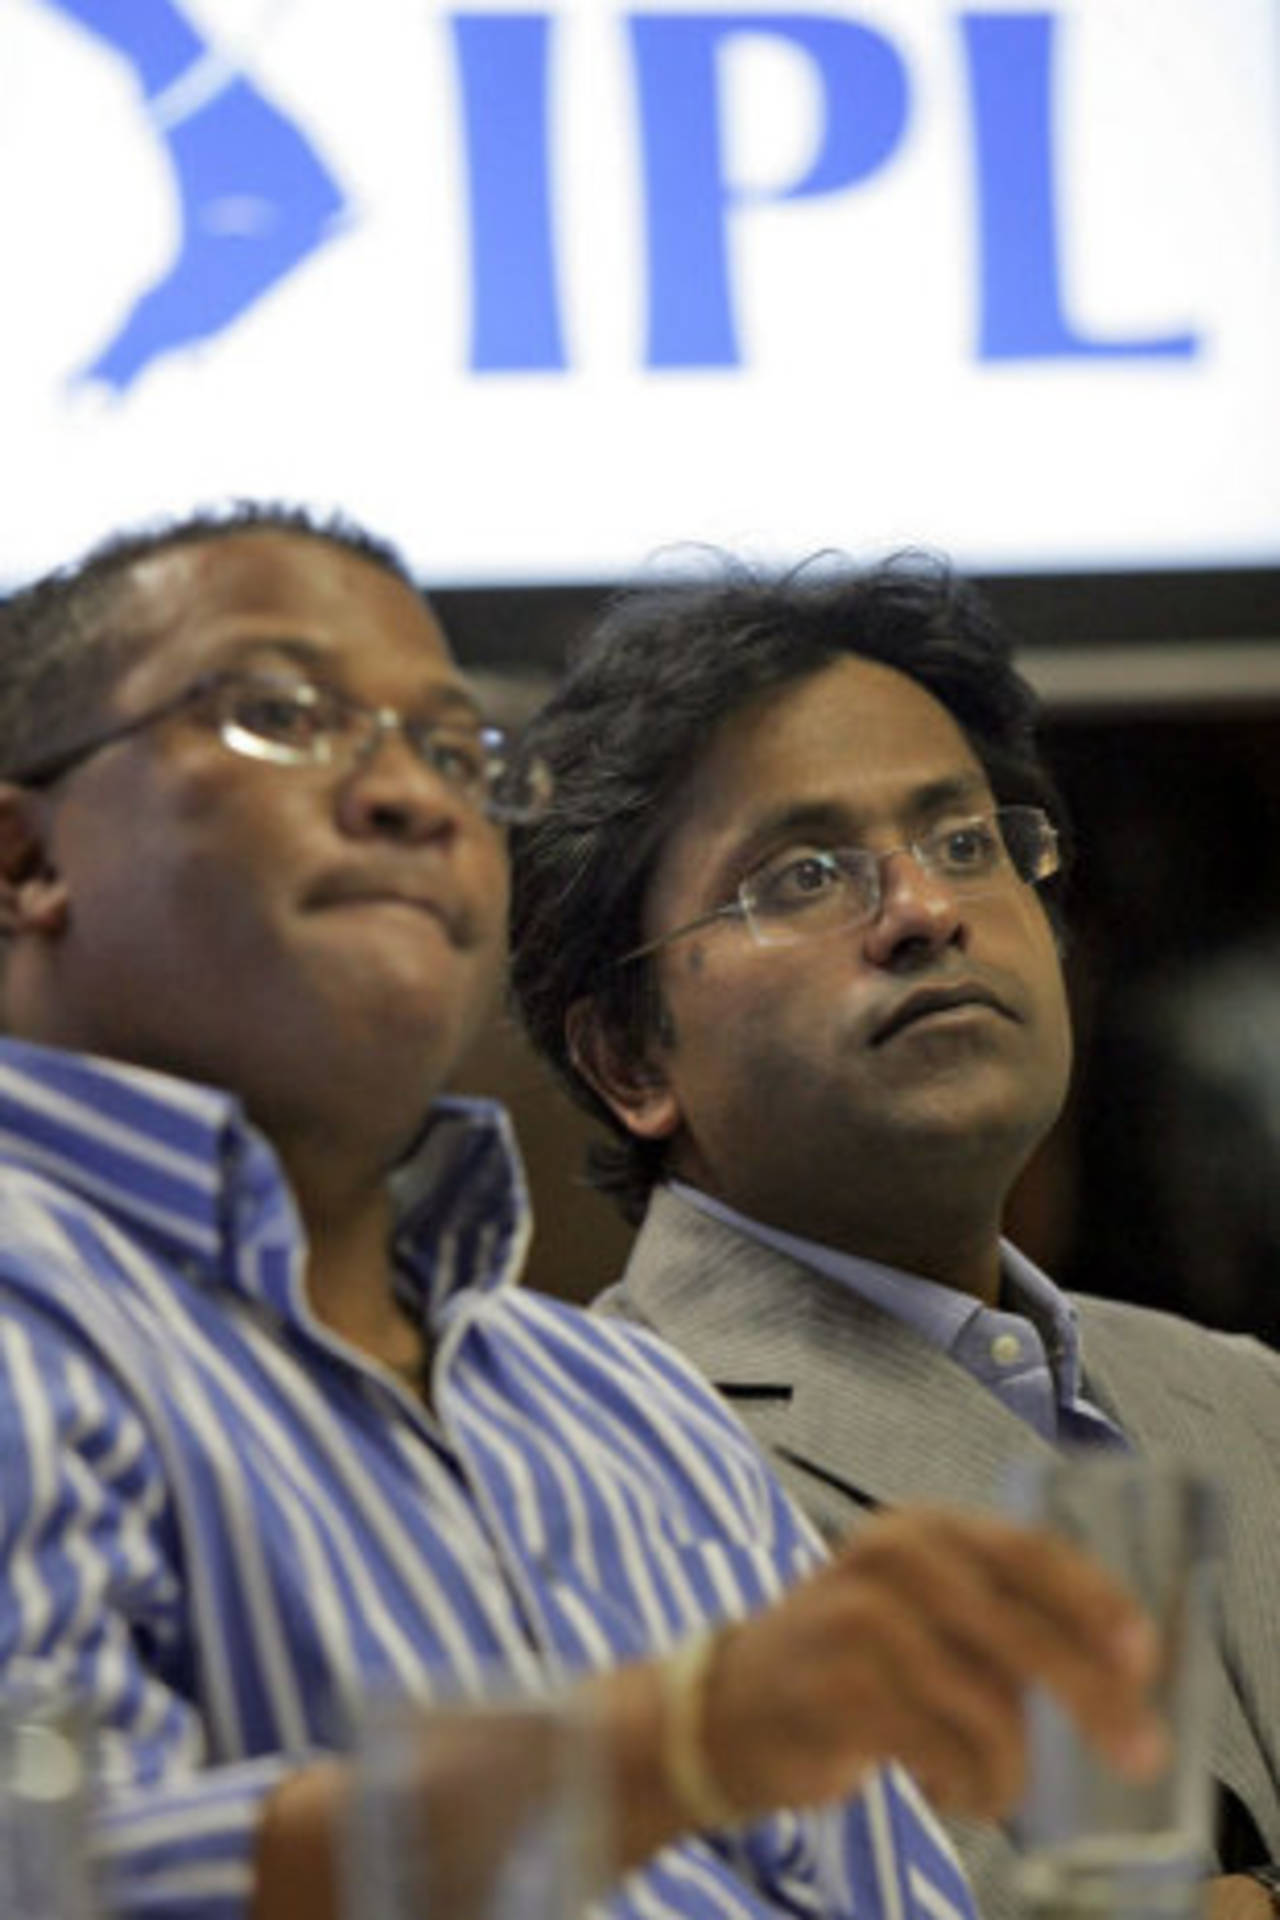 Gerald Majola and Lalit Modi at a press conference announcing that South Africa will host the second season of the IPL, Johannesburg, March 24, 2009